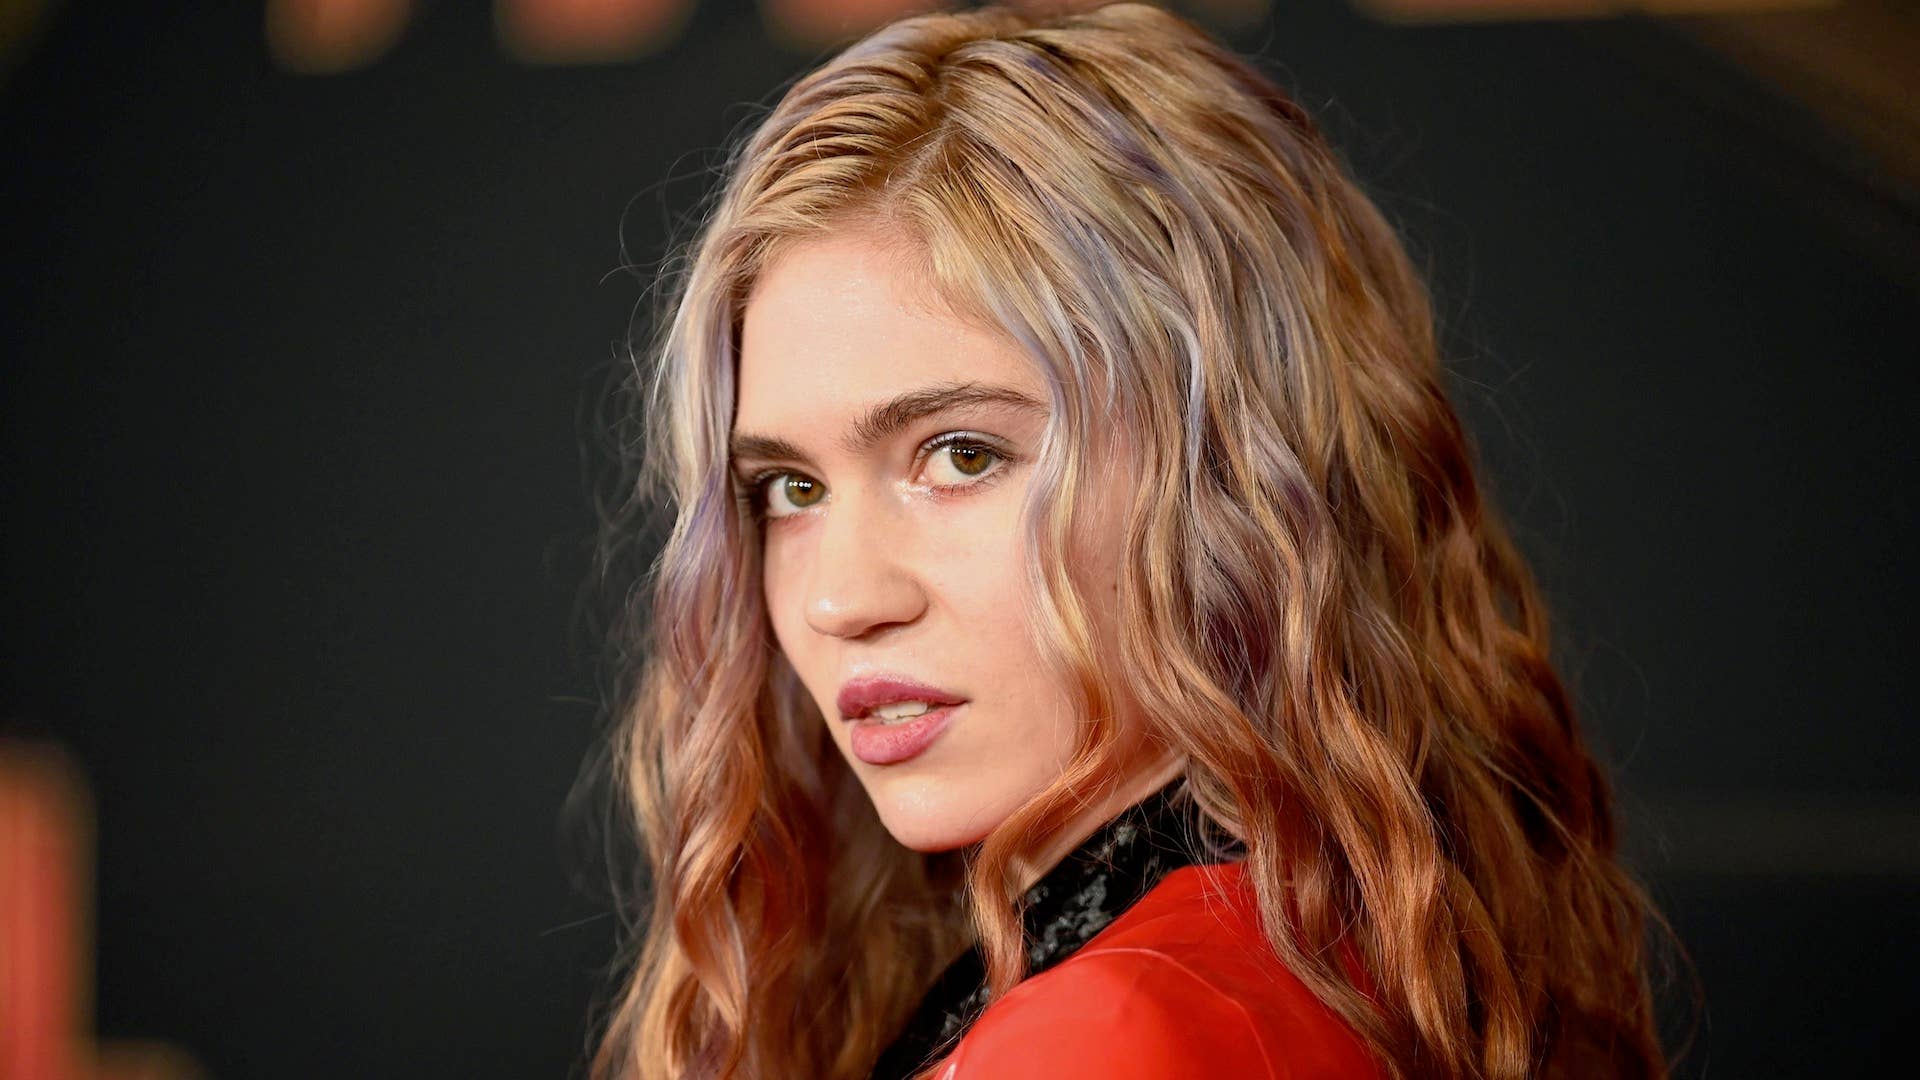 Grimes (Claire Elise Boucher) attends the world premiere of "Captain Marvel" in Hollywood